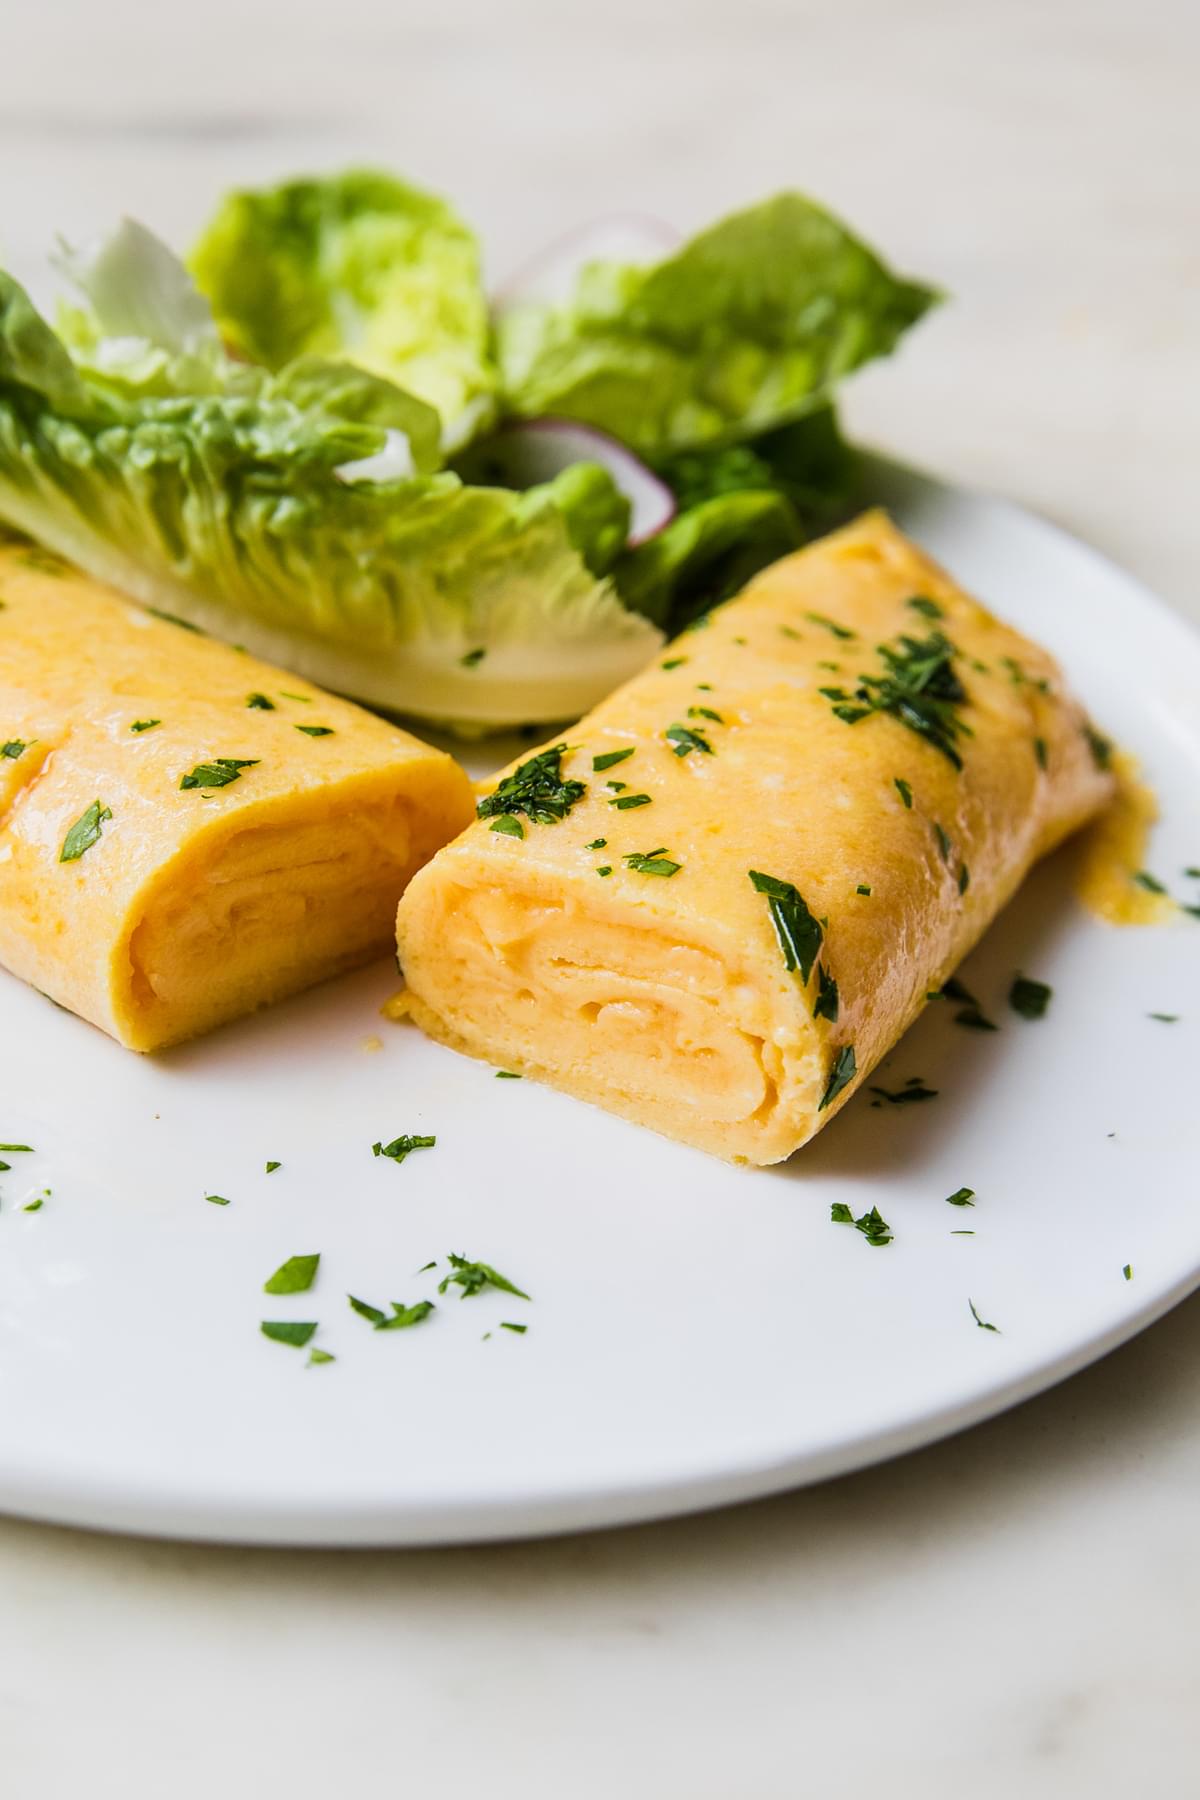 a homemade French omelette cut in half sprinkled with parsley on a plate next to a simple salad of lettuce and sliced radish